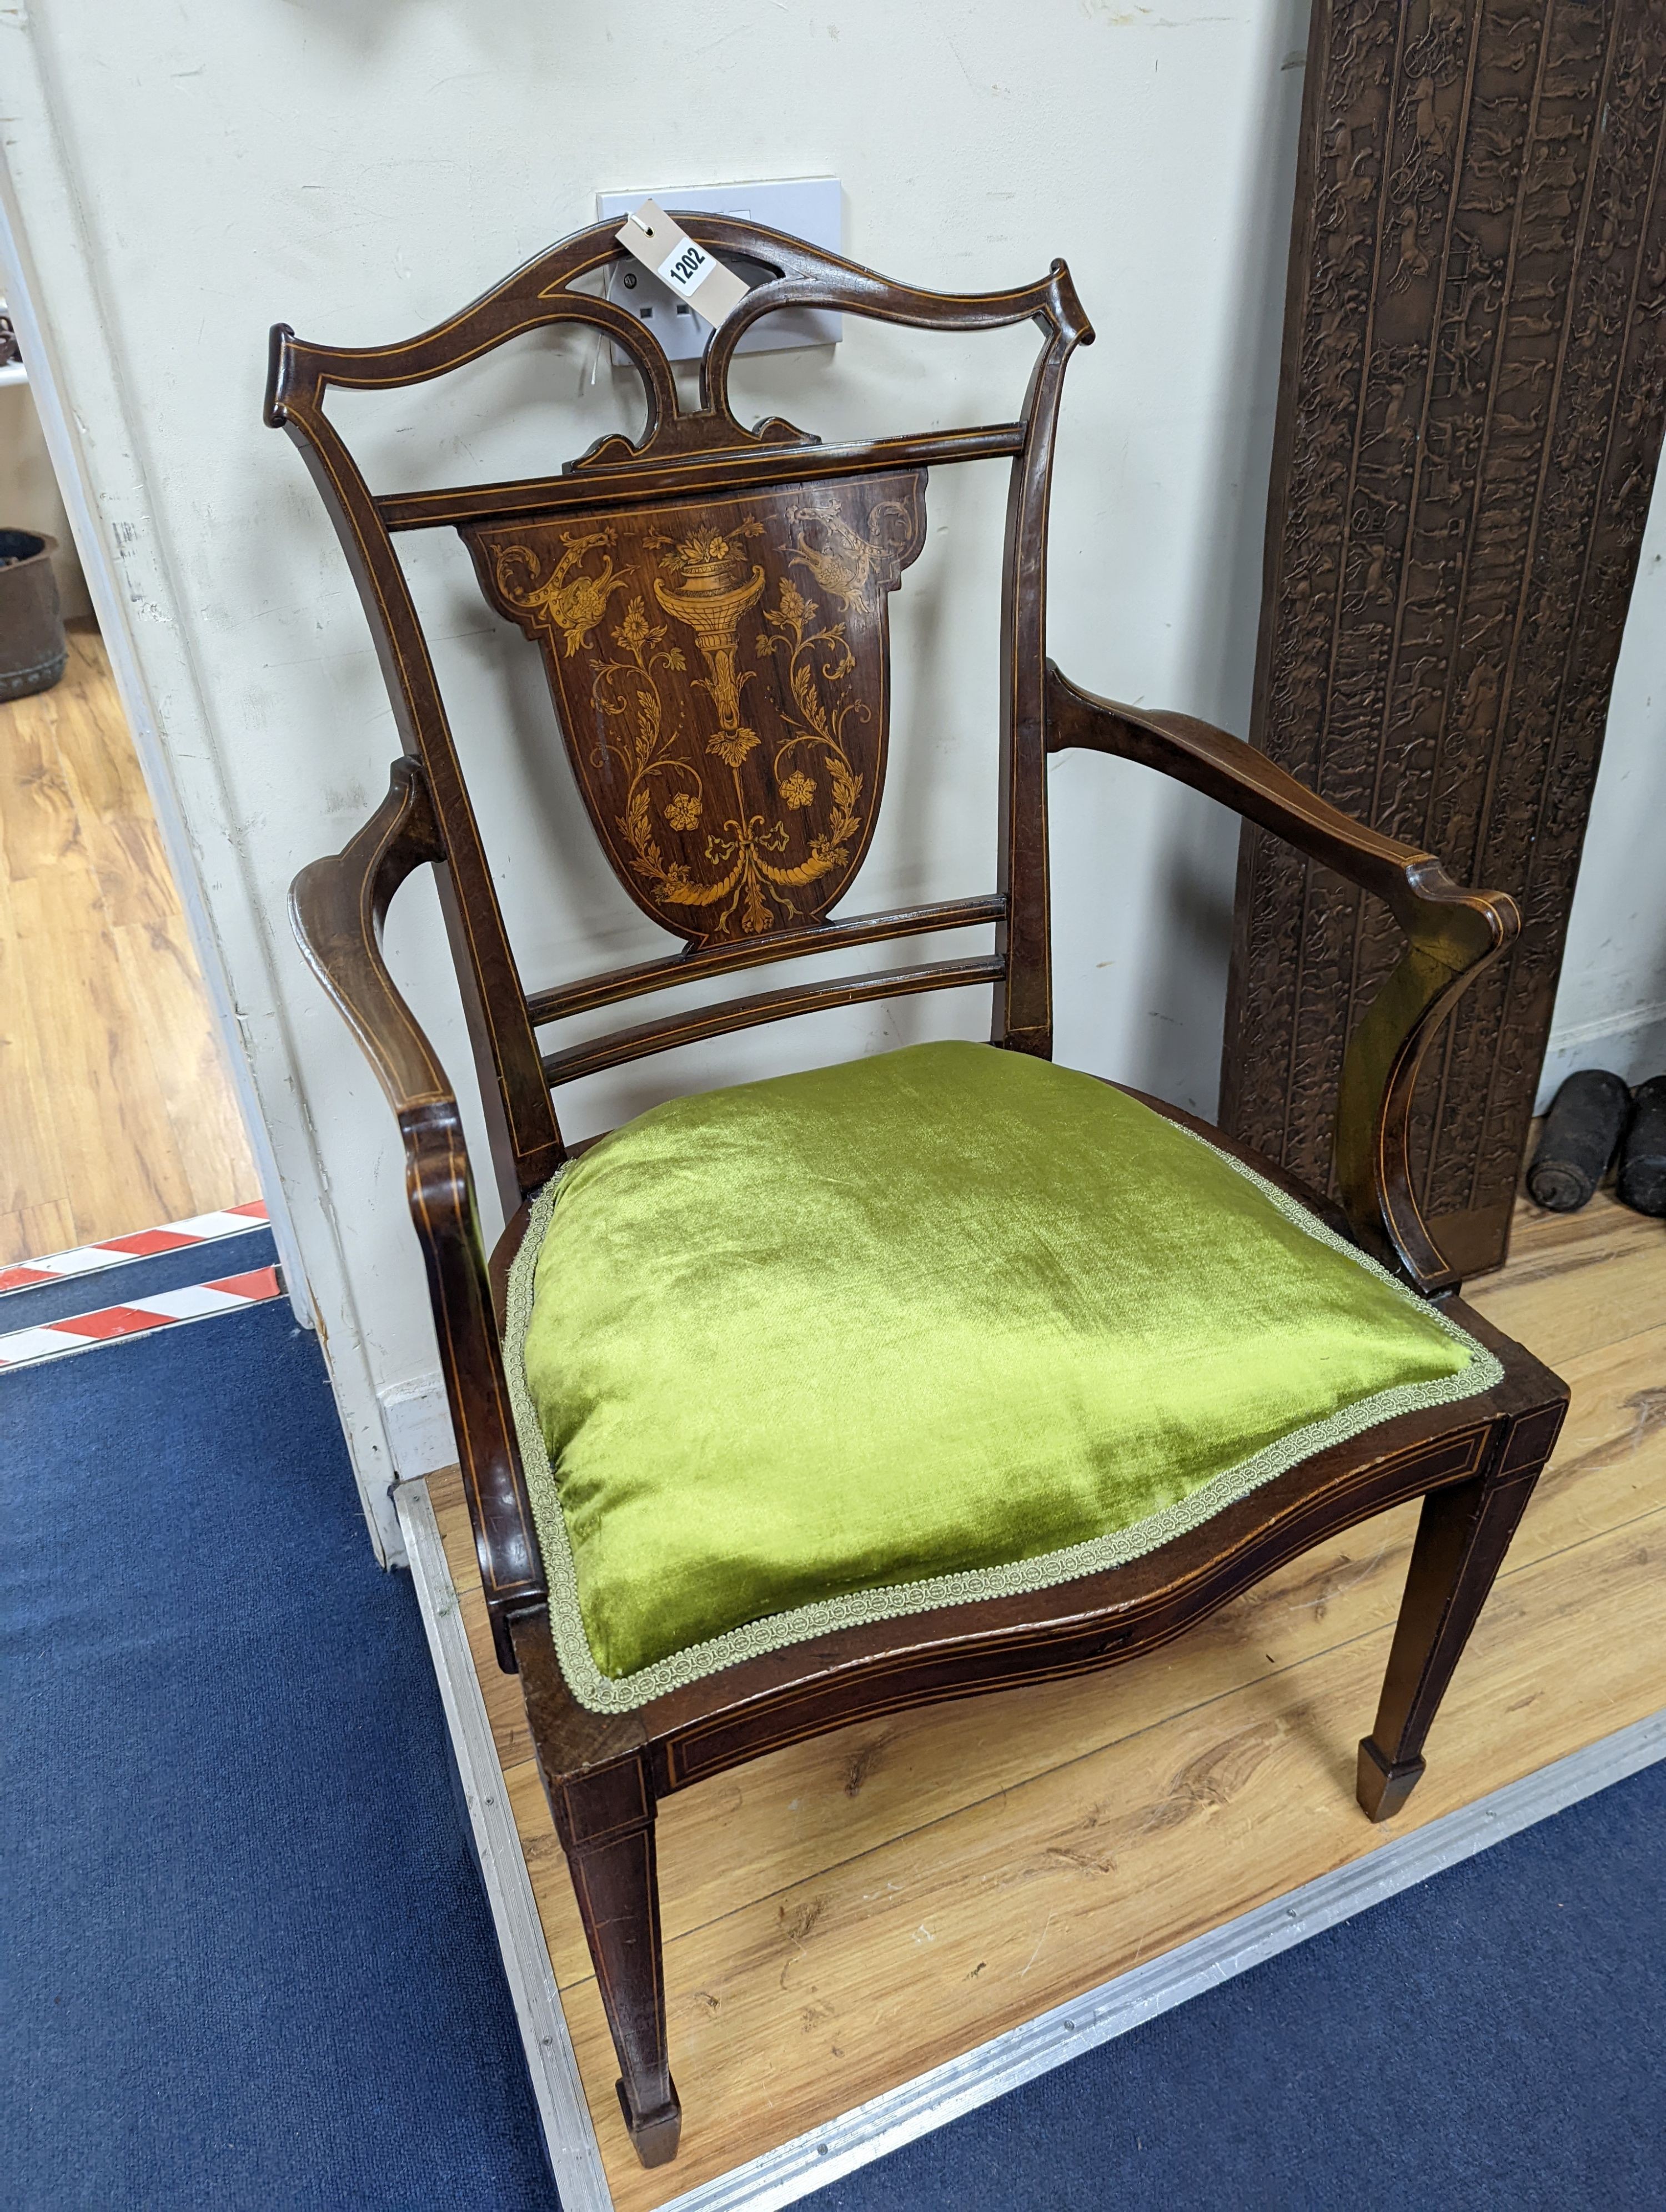 An Edwardian marquetry inlaid mahogany elbow chair